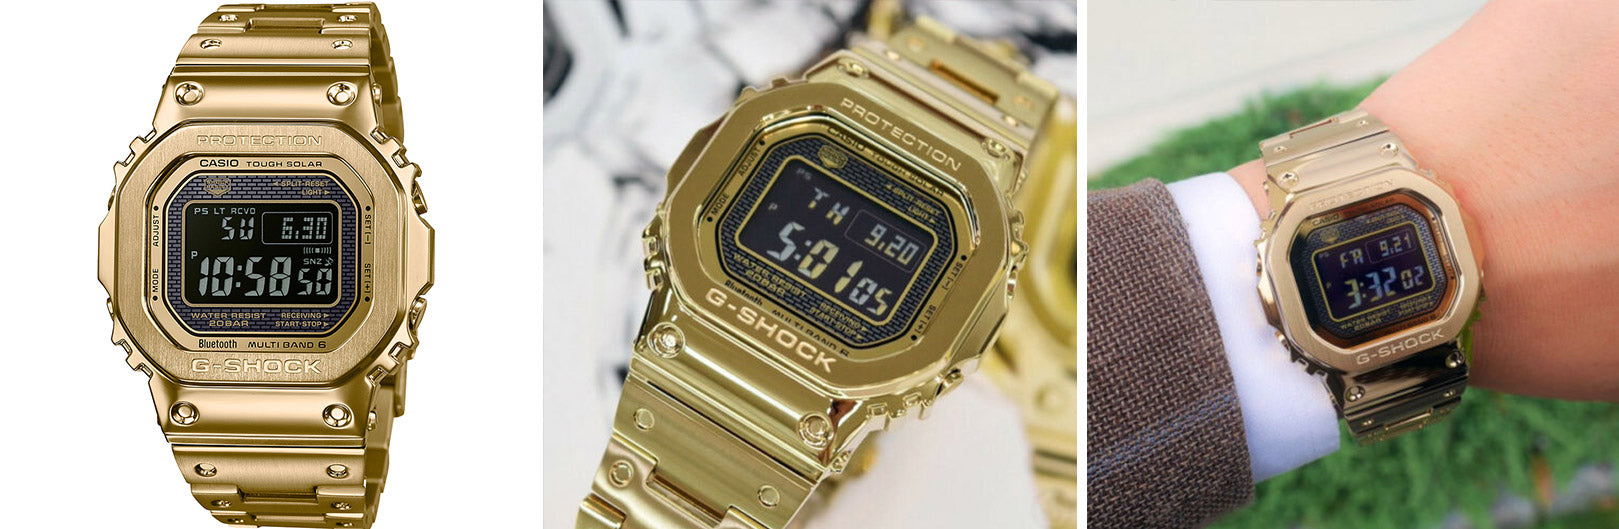 GMWB5000GD-9D from the best G-Shock square watches